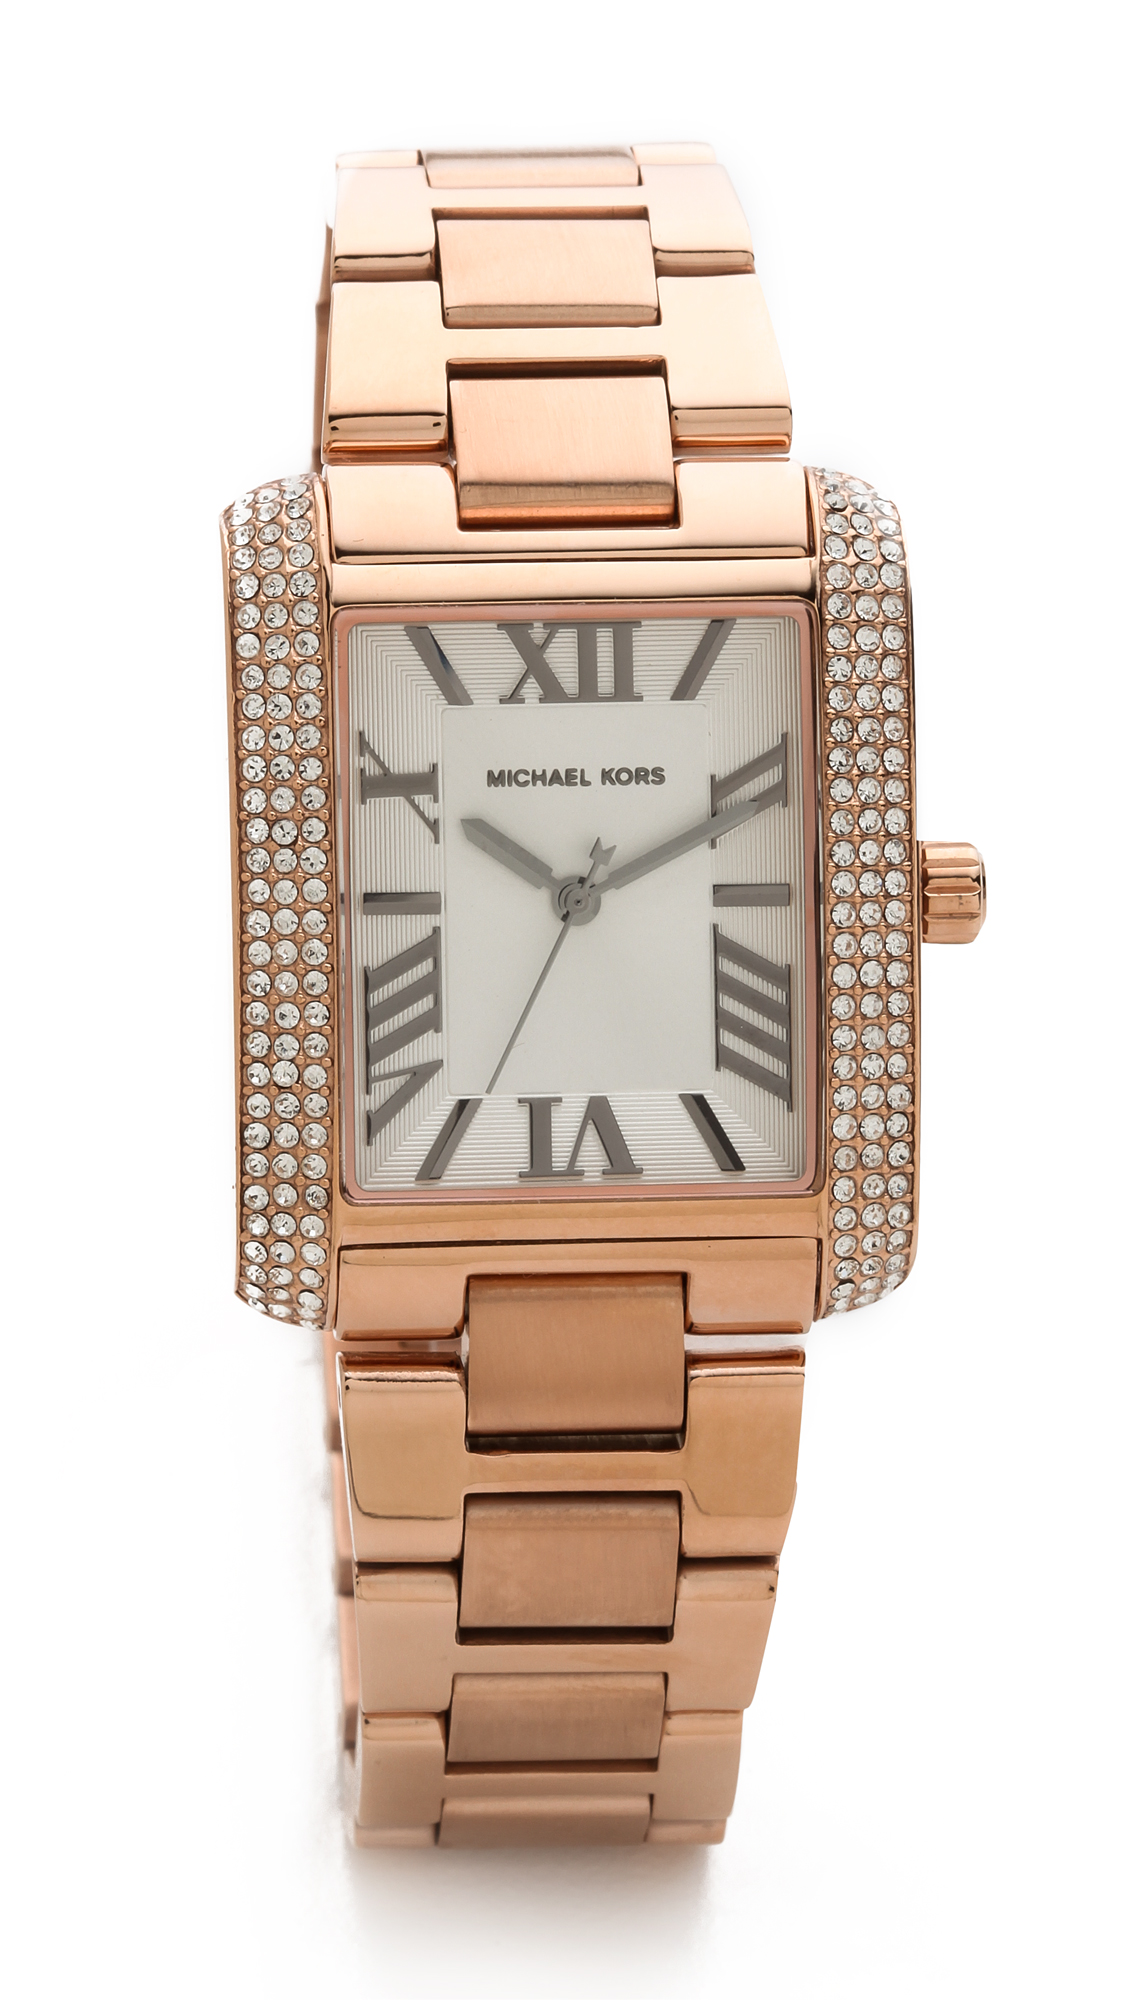 Michael Kors Watches Square Face Hot Sale, 50% OFF | www 